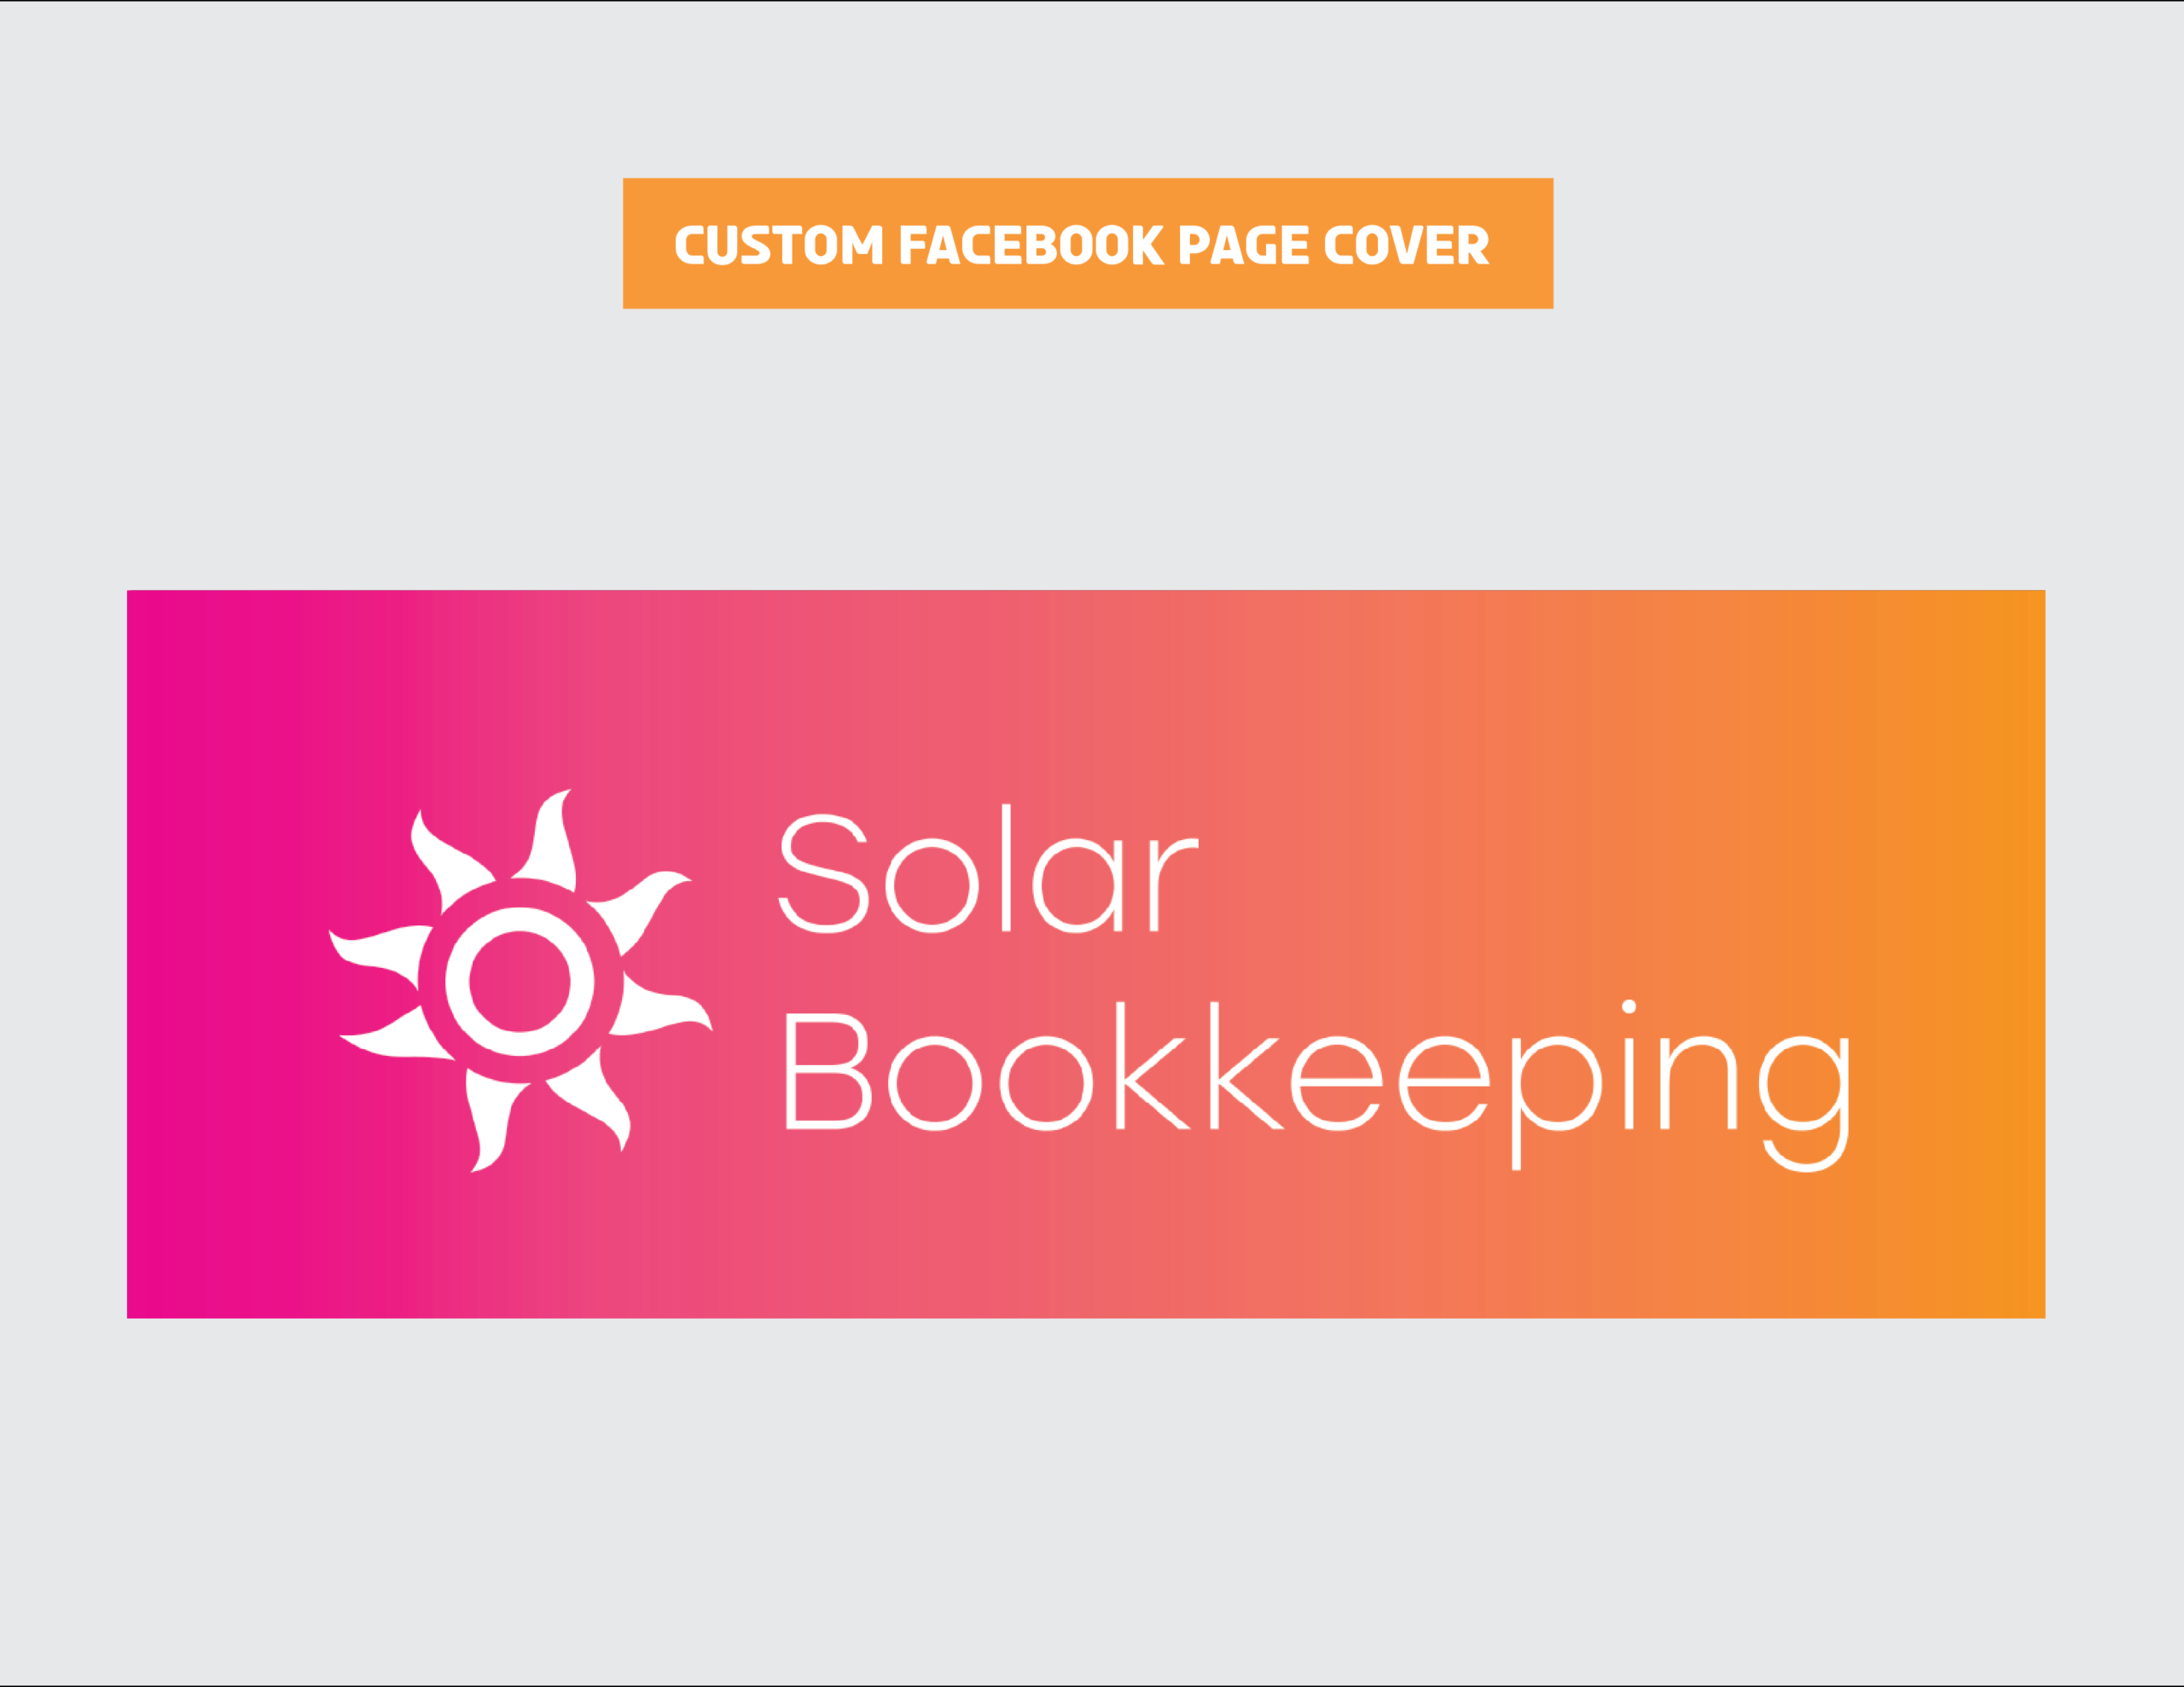 06_SolarBookkeeping_Custom Facebook Page Cover